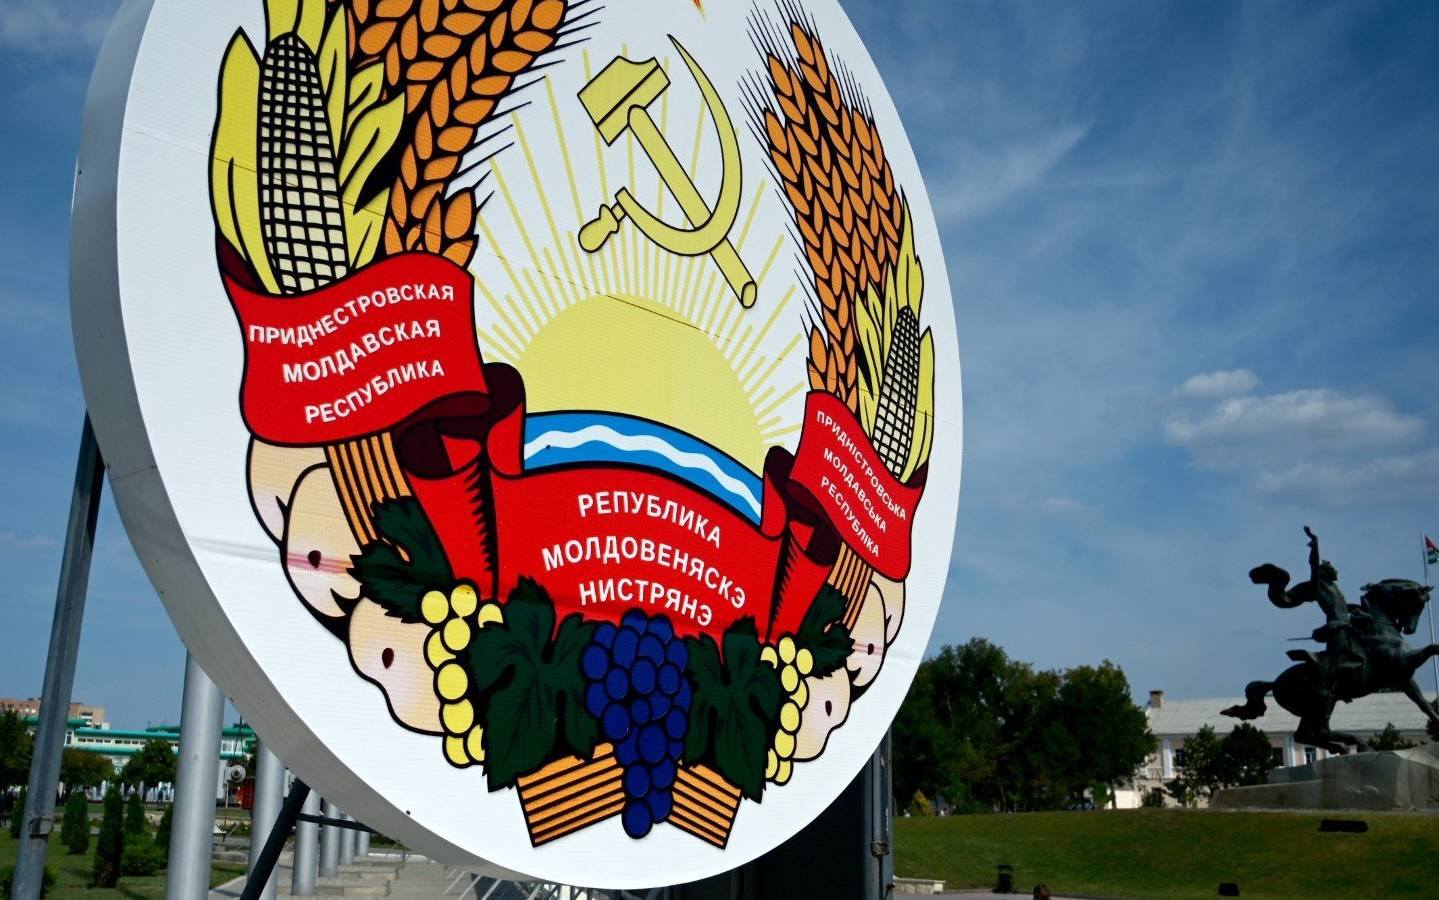 (FILES) In this file photo taken on September 11, 2021 a woman walks past a huge coat of arms of Transnistria - Moldova's pro-Russian breakaway region on the eastern border with Ukraine, in Transnistria's capital of Tiraspol. - The president of ex-Soviet Moldova on April 26, 2022 convened a meeting of the country's security council after a series of blasts in the Russian-backed separatist Transnistria region. The breakaway region of ex-Soviet Moldova, which borders western Ukraine, saw explosions hit its security ministry on Monday and a radio tower on Tuesday morning. The incidents come after a senior Russian military official last week raised the issue of "oppression" of Russian speakers in Transnistria in the context of Russia's military campaign in Ukraine. (Photo by Sergei GAPON / AFP)